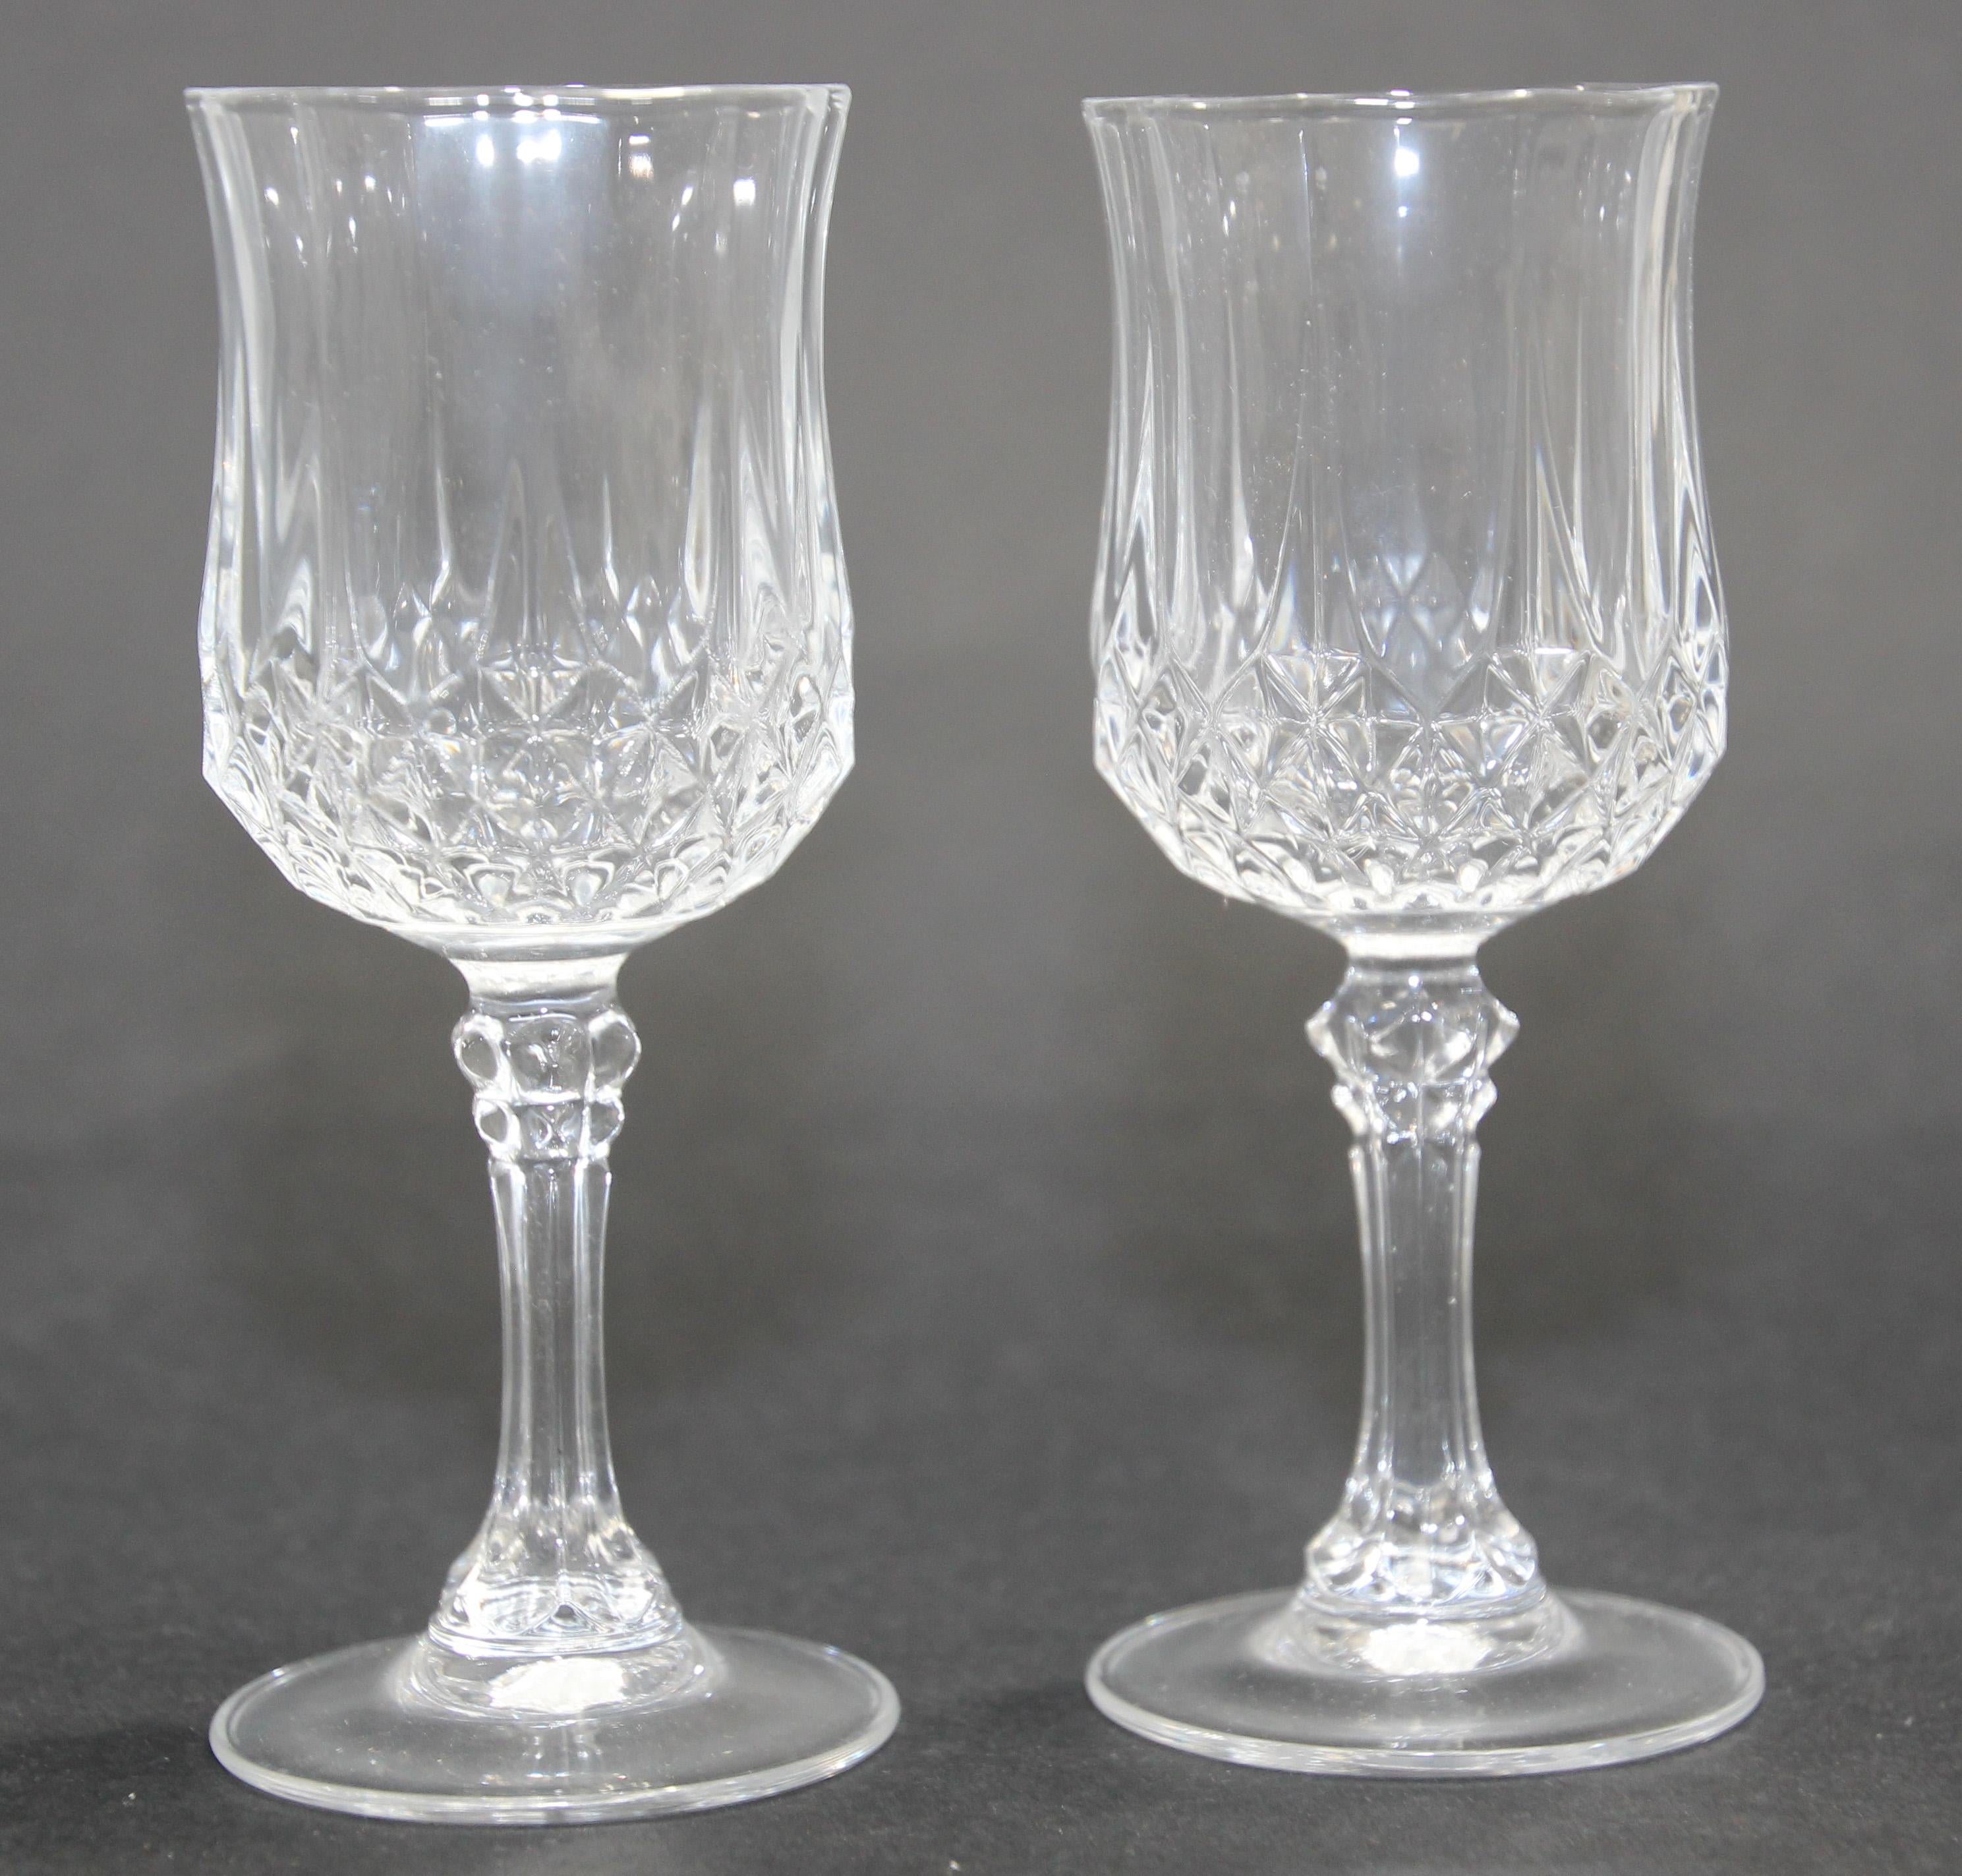 20th Century Crystal D' Arques Longchamp Footed Drinking Glasses, set of 12